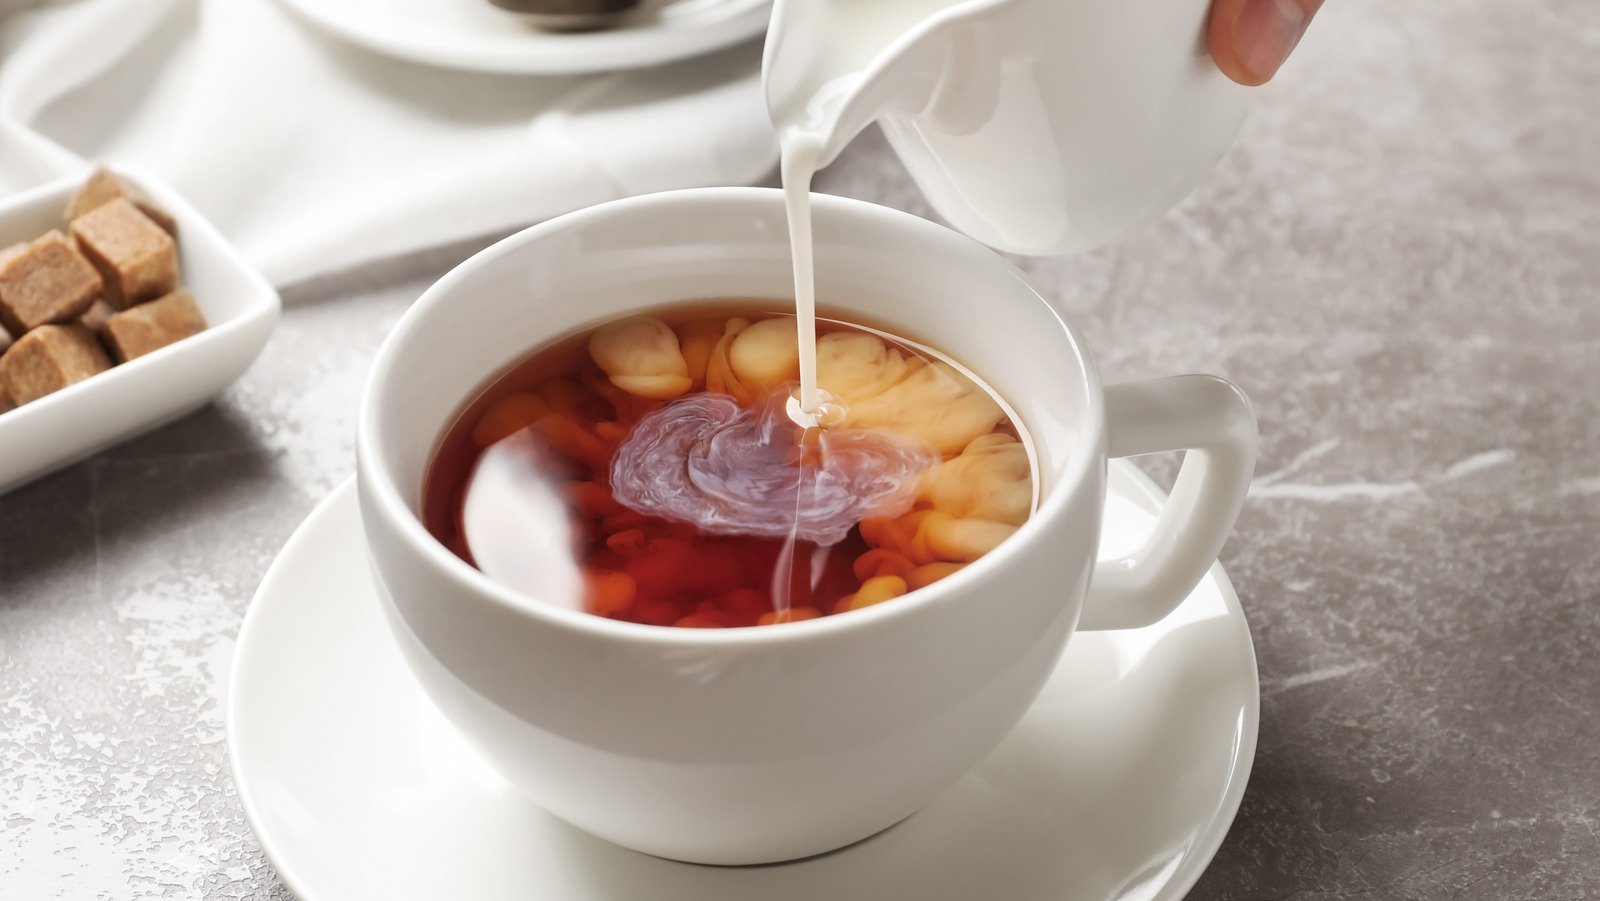 15 Things To Add To Your Tea To Make It Taste Better